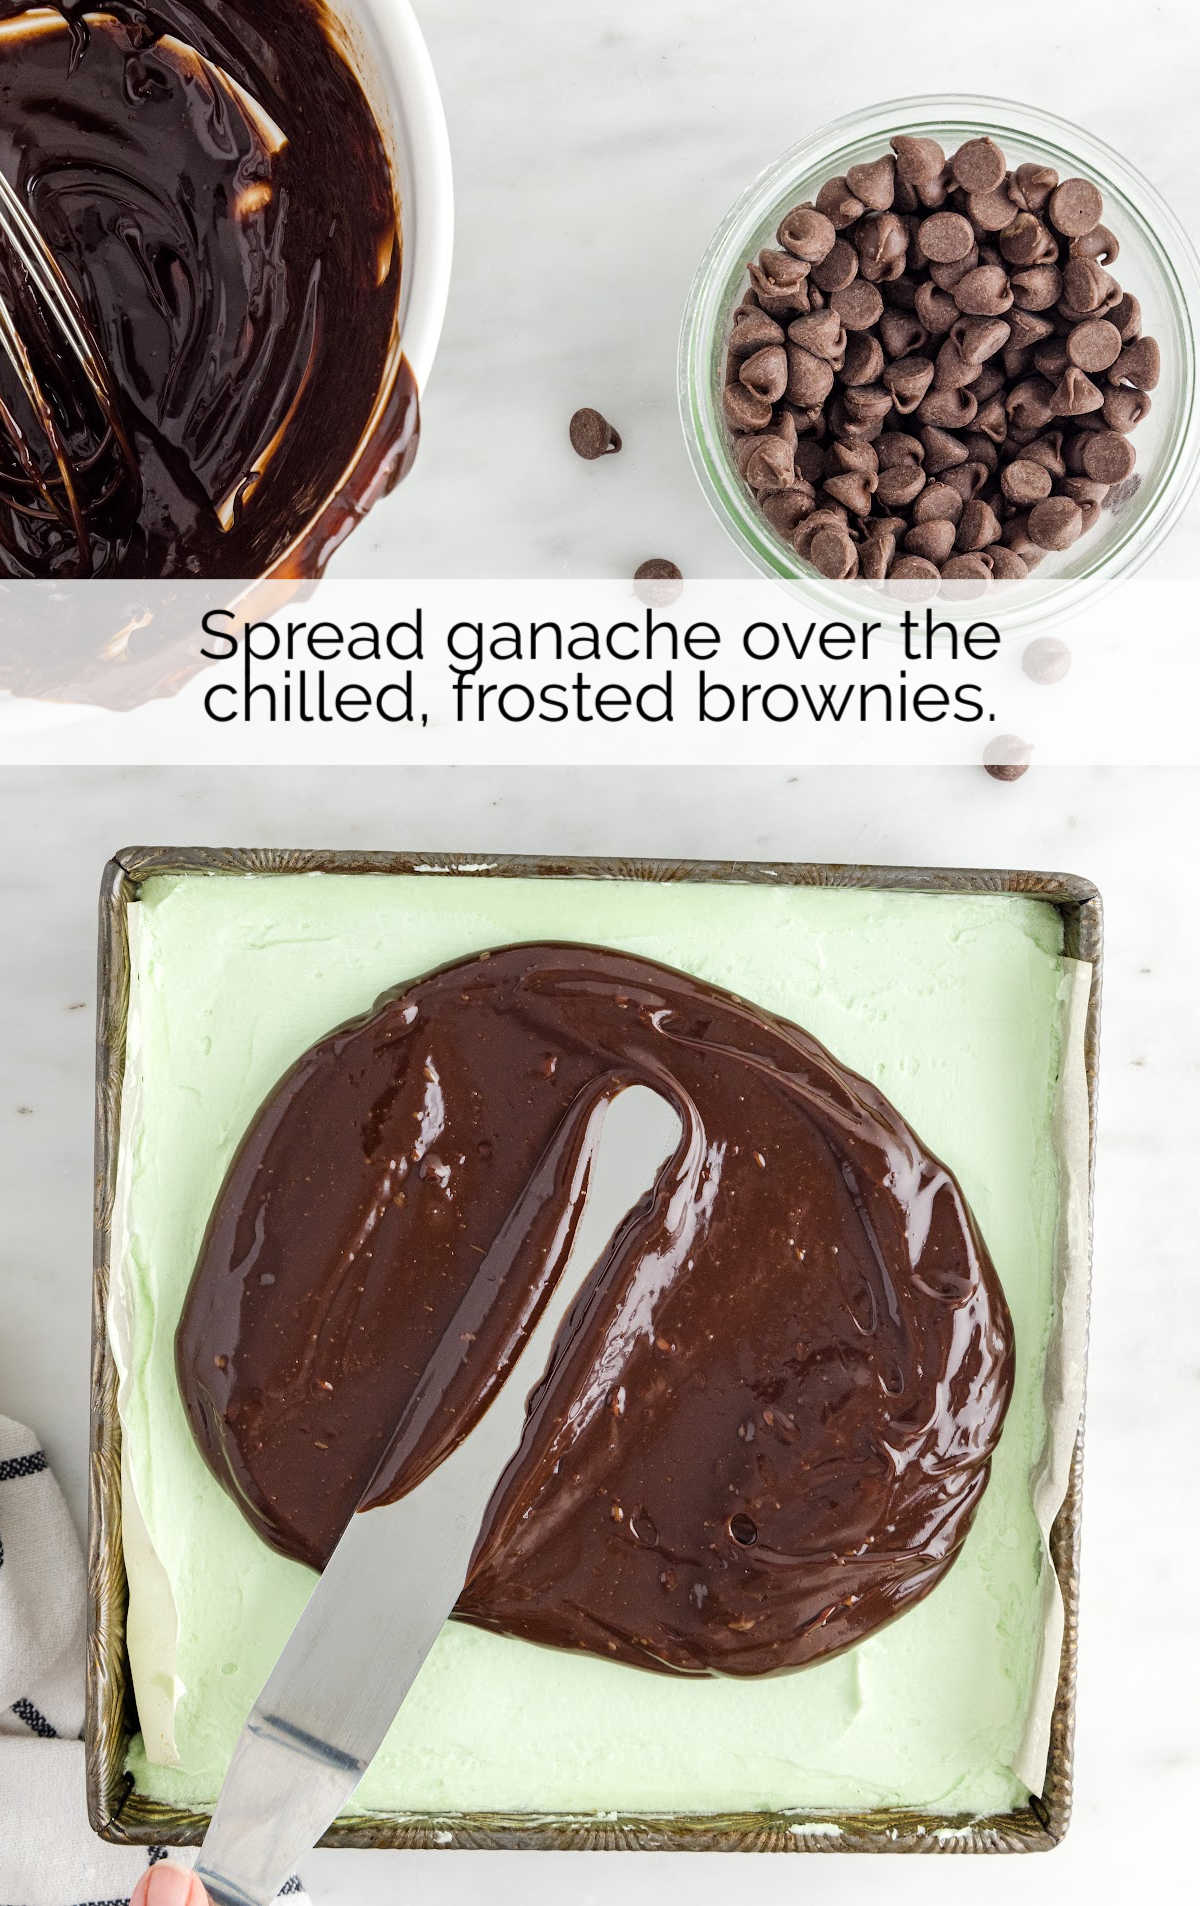 chocolate frosting spread over the frosted brownies in a baking dish